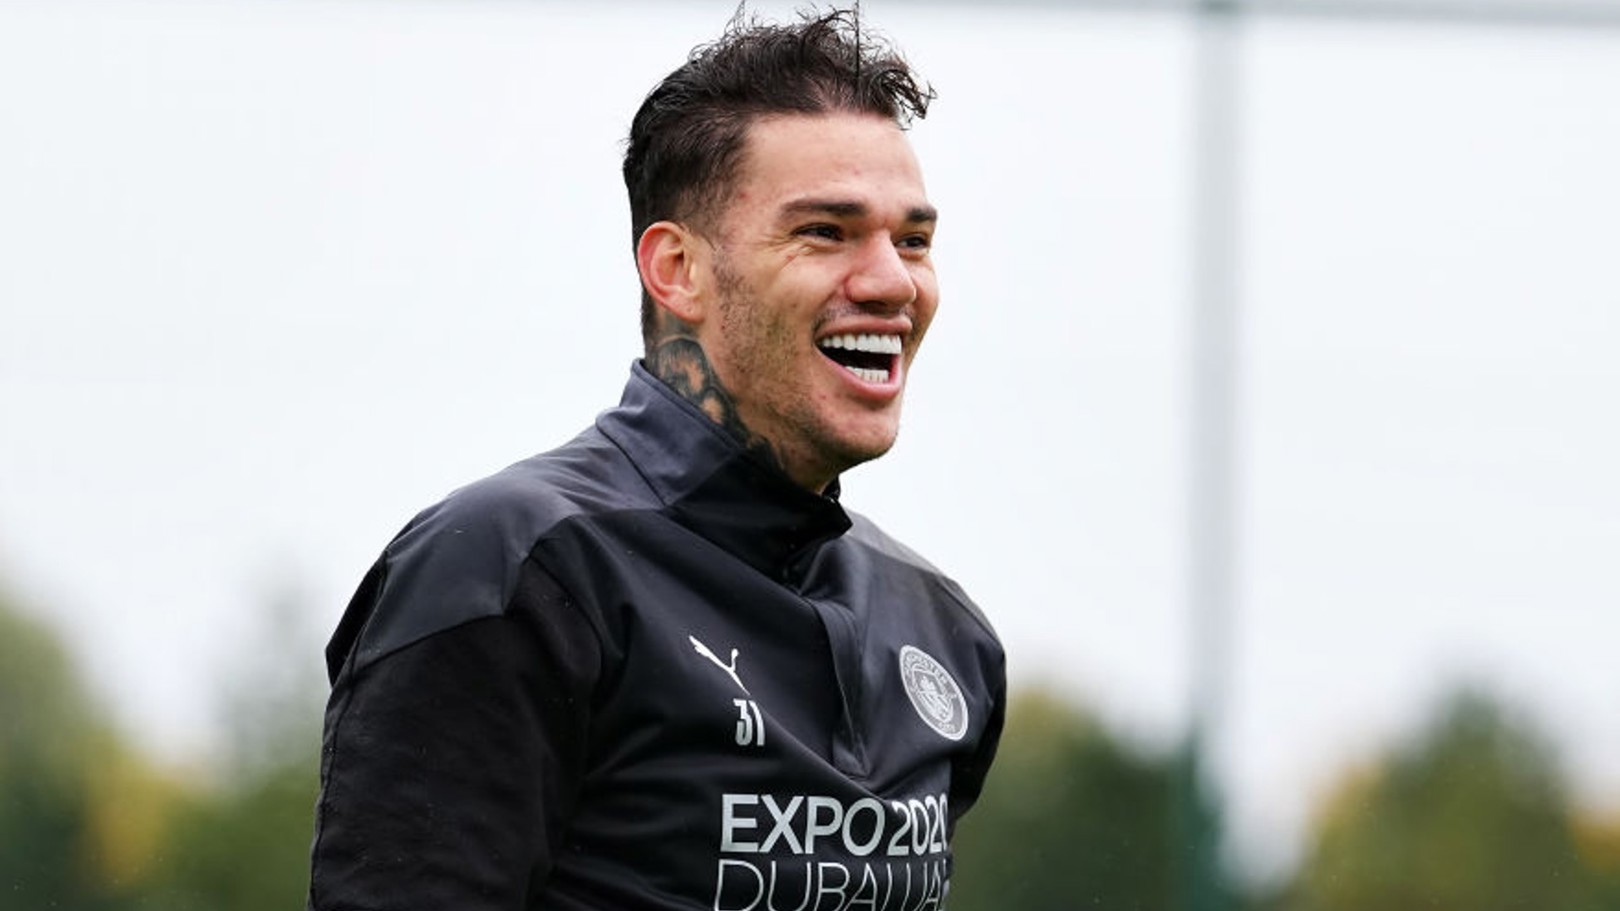 Test your knowledge of Ederson’s City career so far!